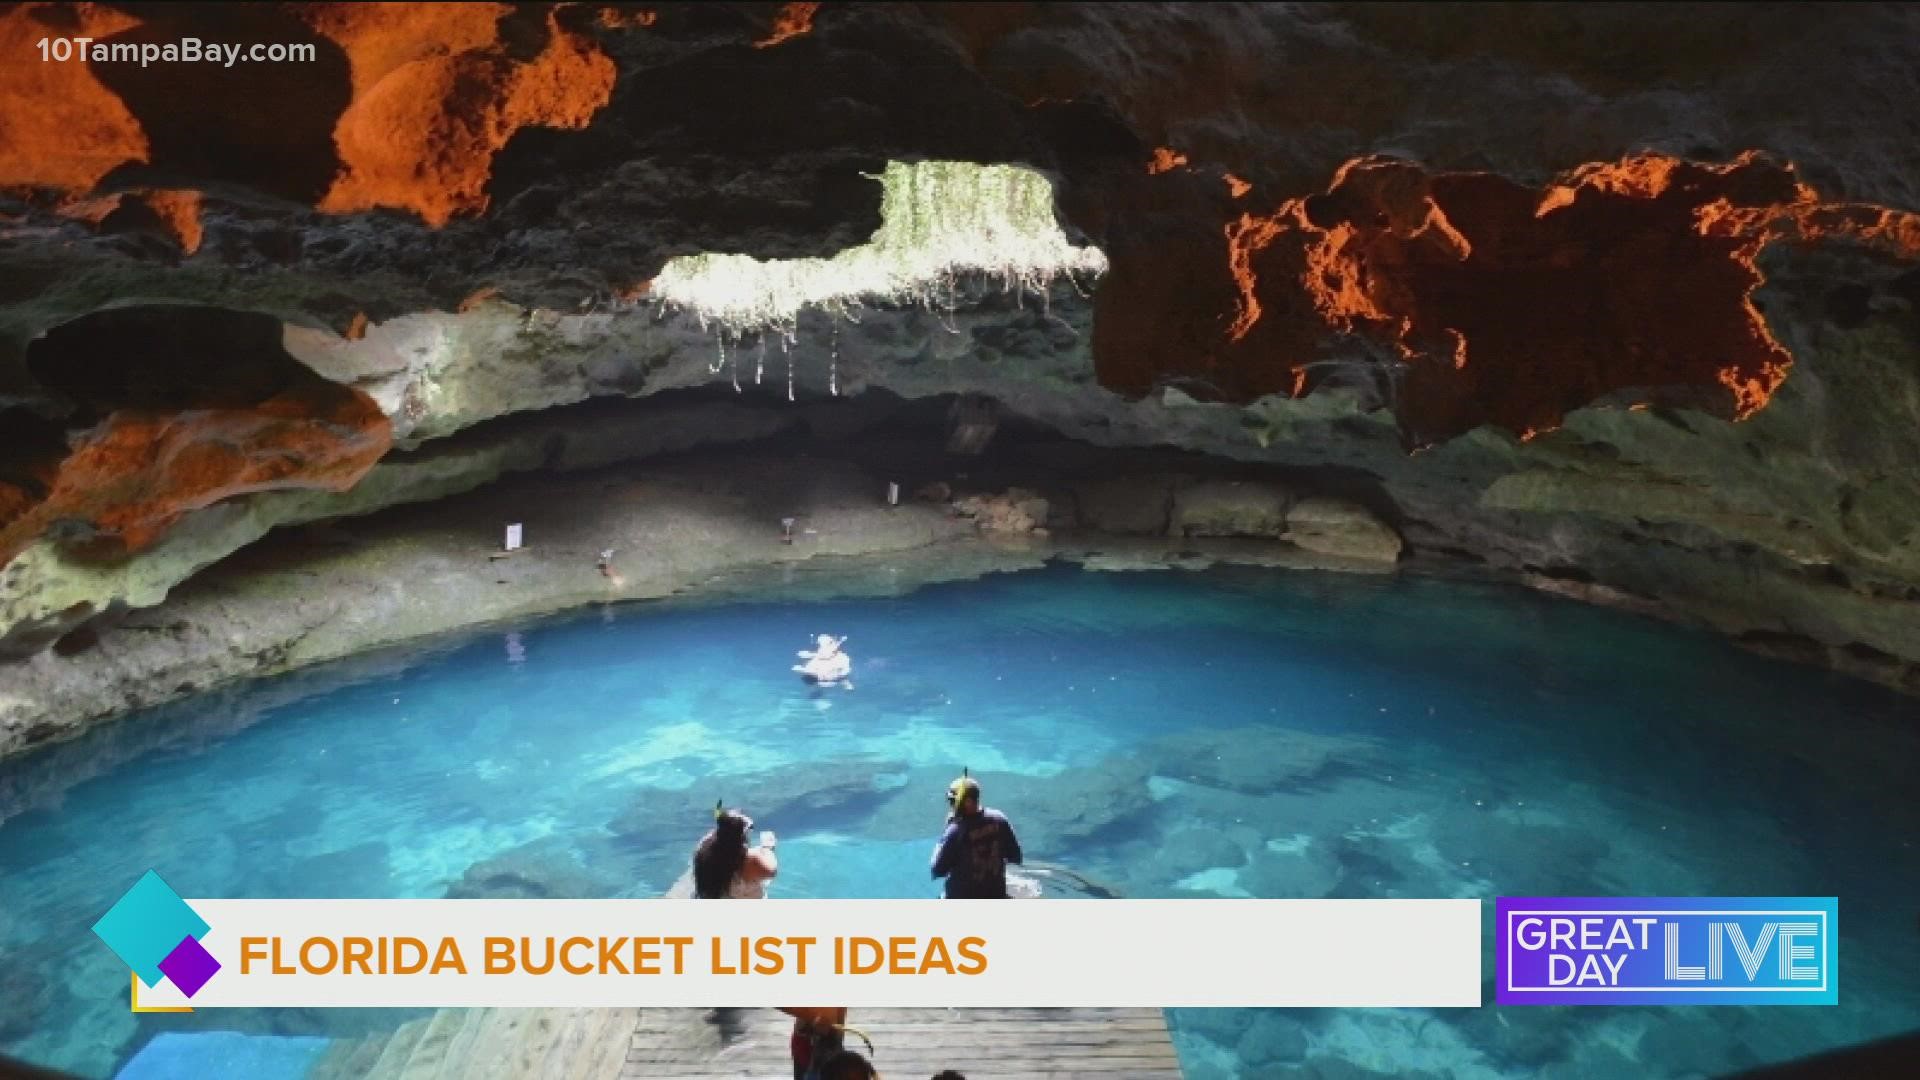 Outdoorsy Diva, Lauren Gay joins us with places that should be on your Florida bucket list.